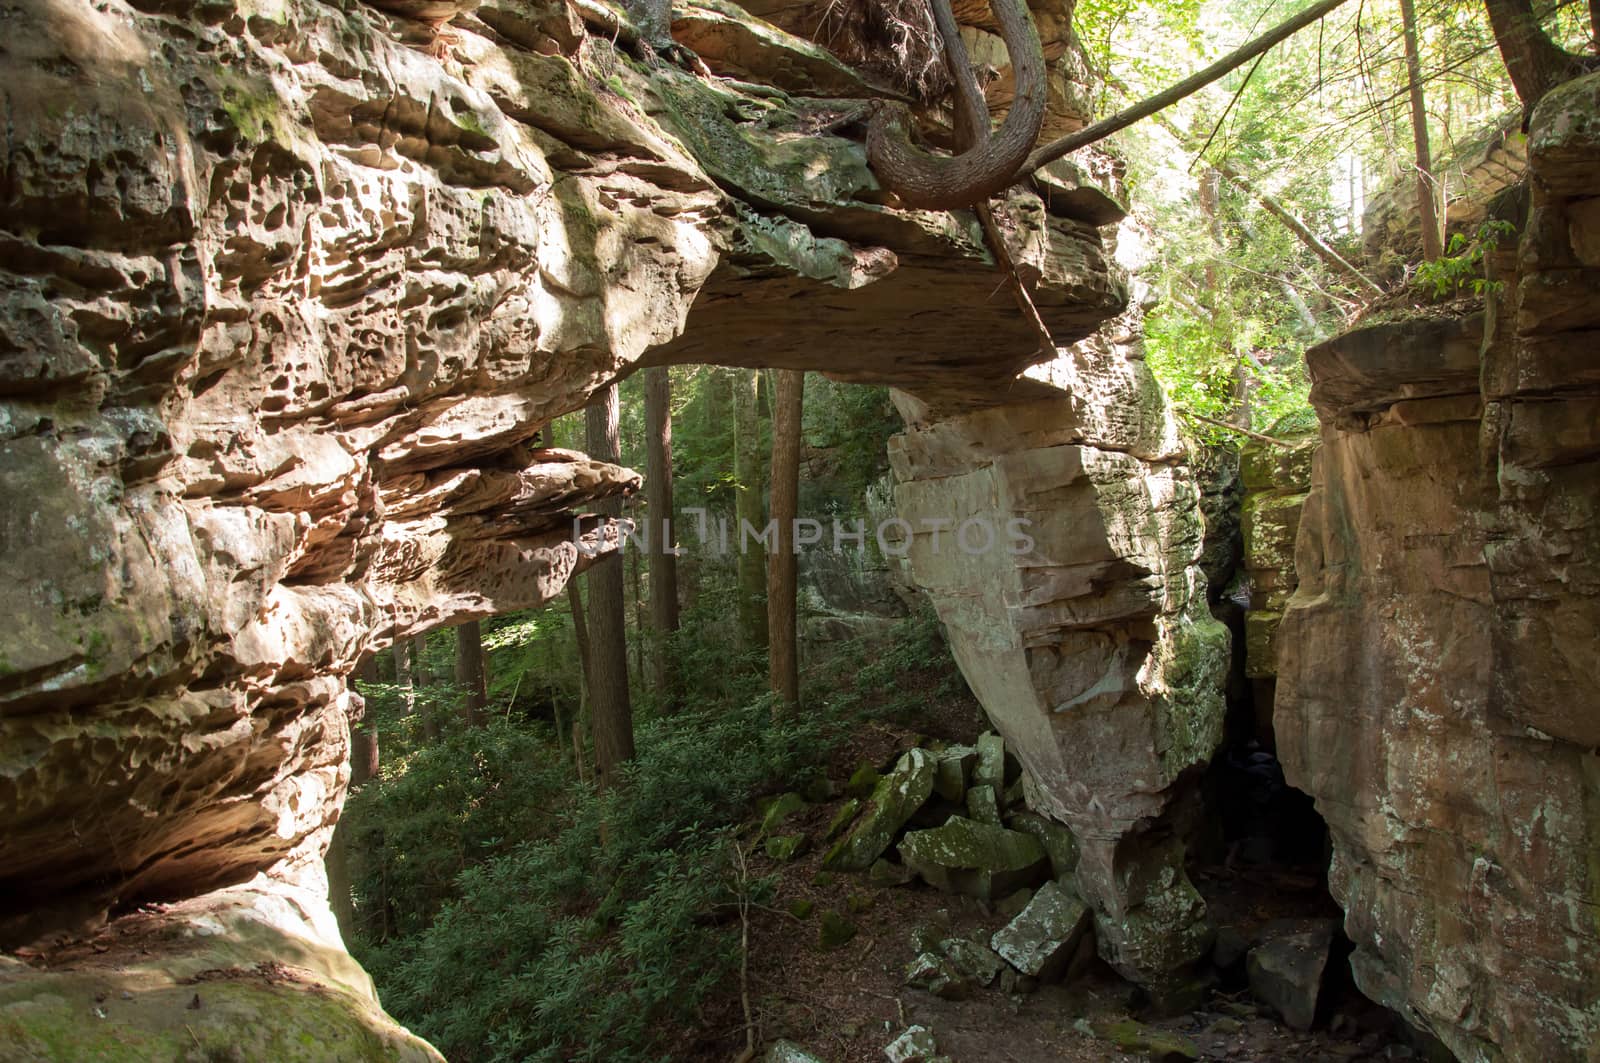 Splitbow Arch in the Big South Fork Recreation Area in Kentucky.